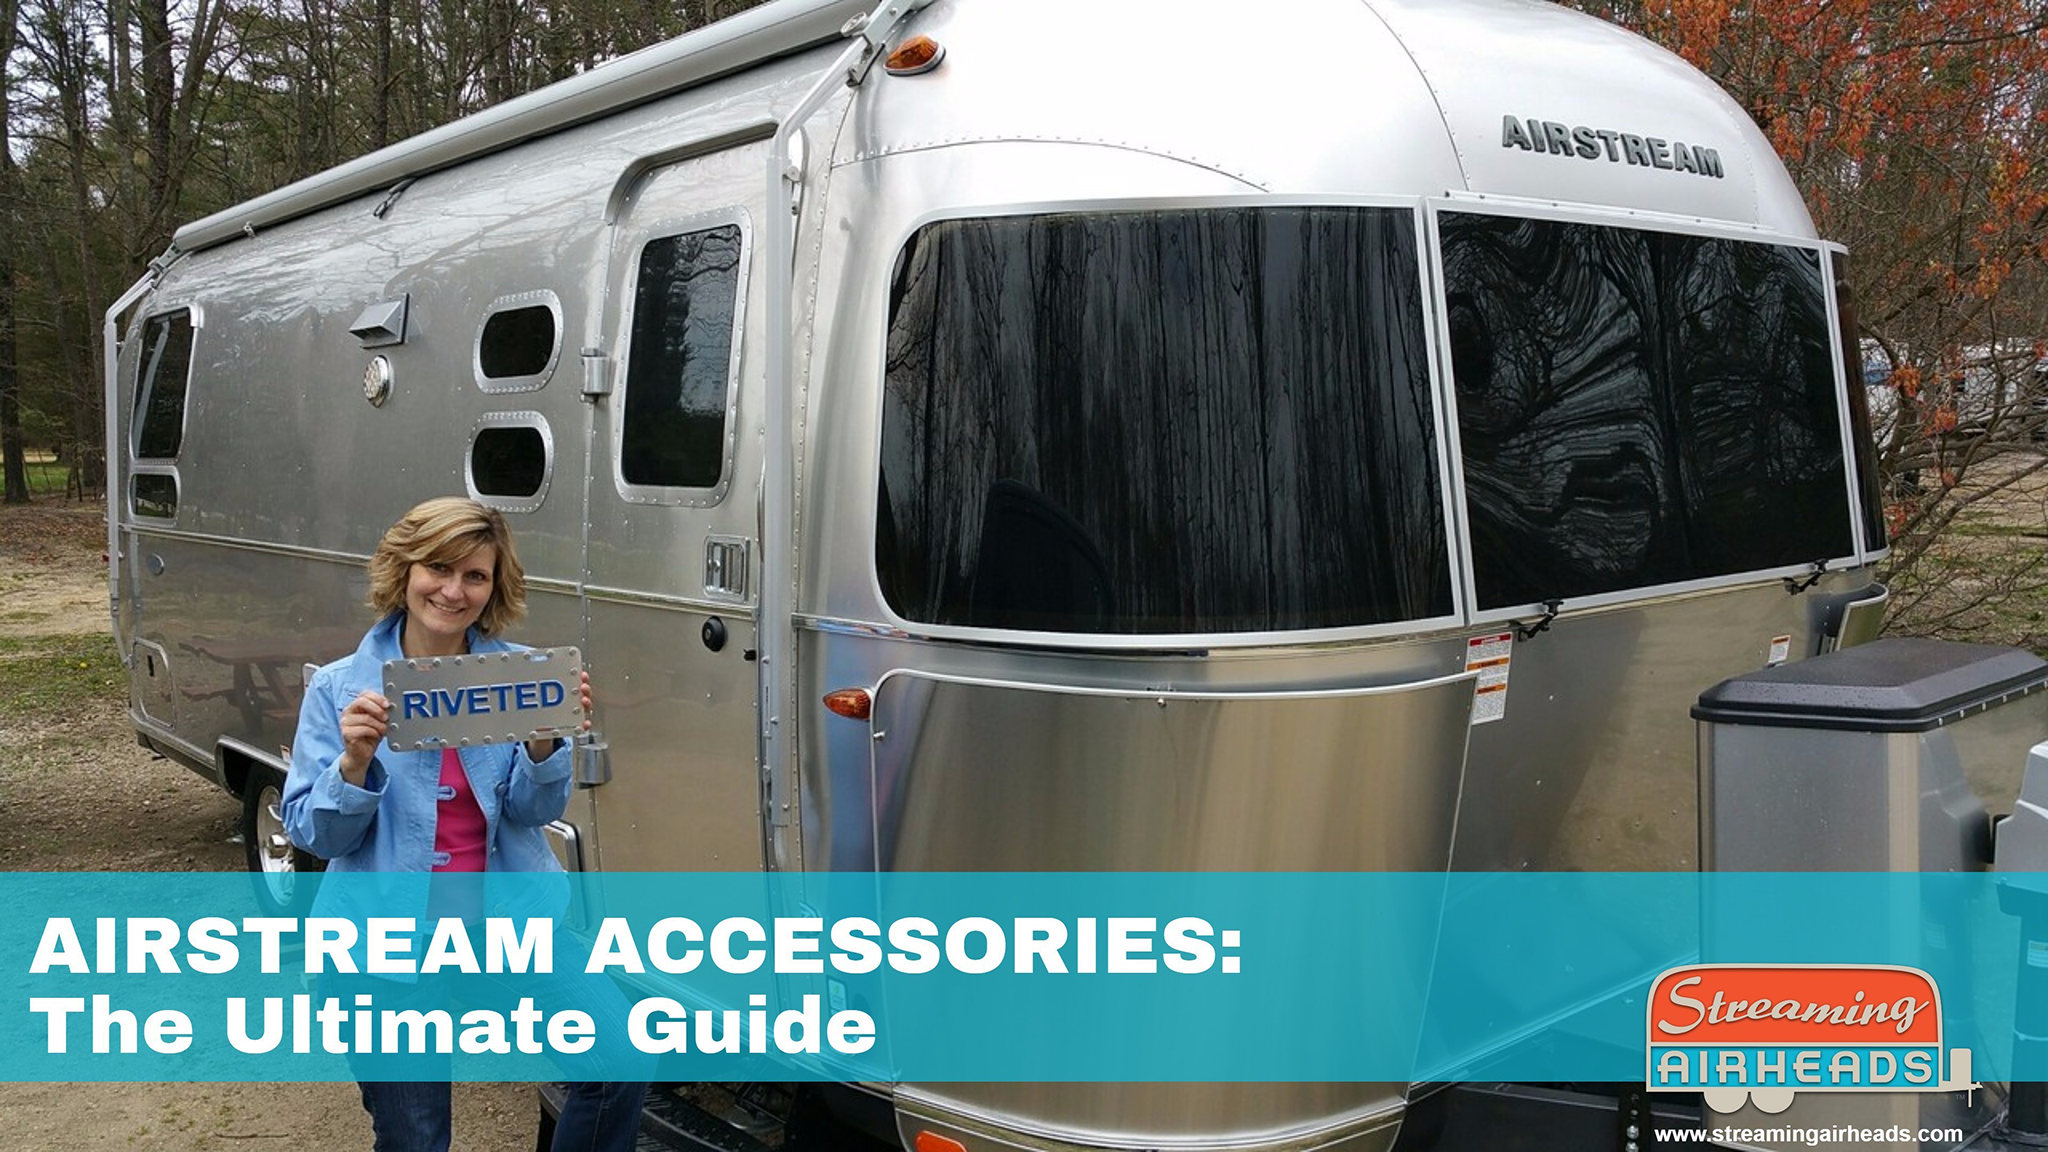 Airstream Accessories: The Ultimate Guide - Streaming Airheads